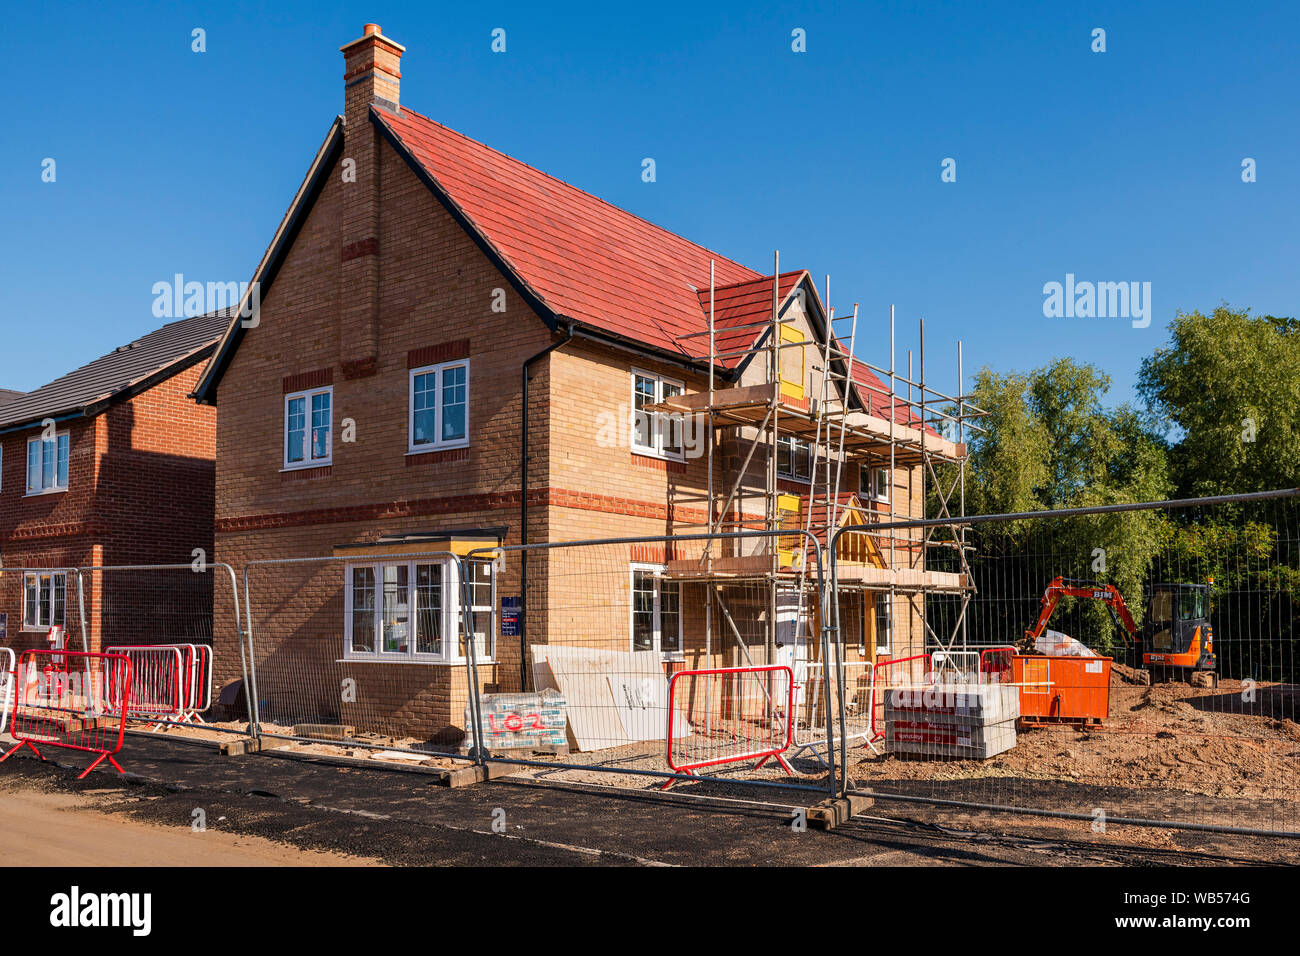 New build homes, England, UK. New house building site with scaffolding in summer. New housing estate being built. Stock Photo